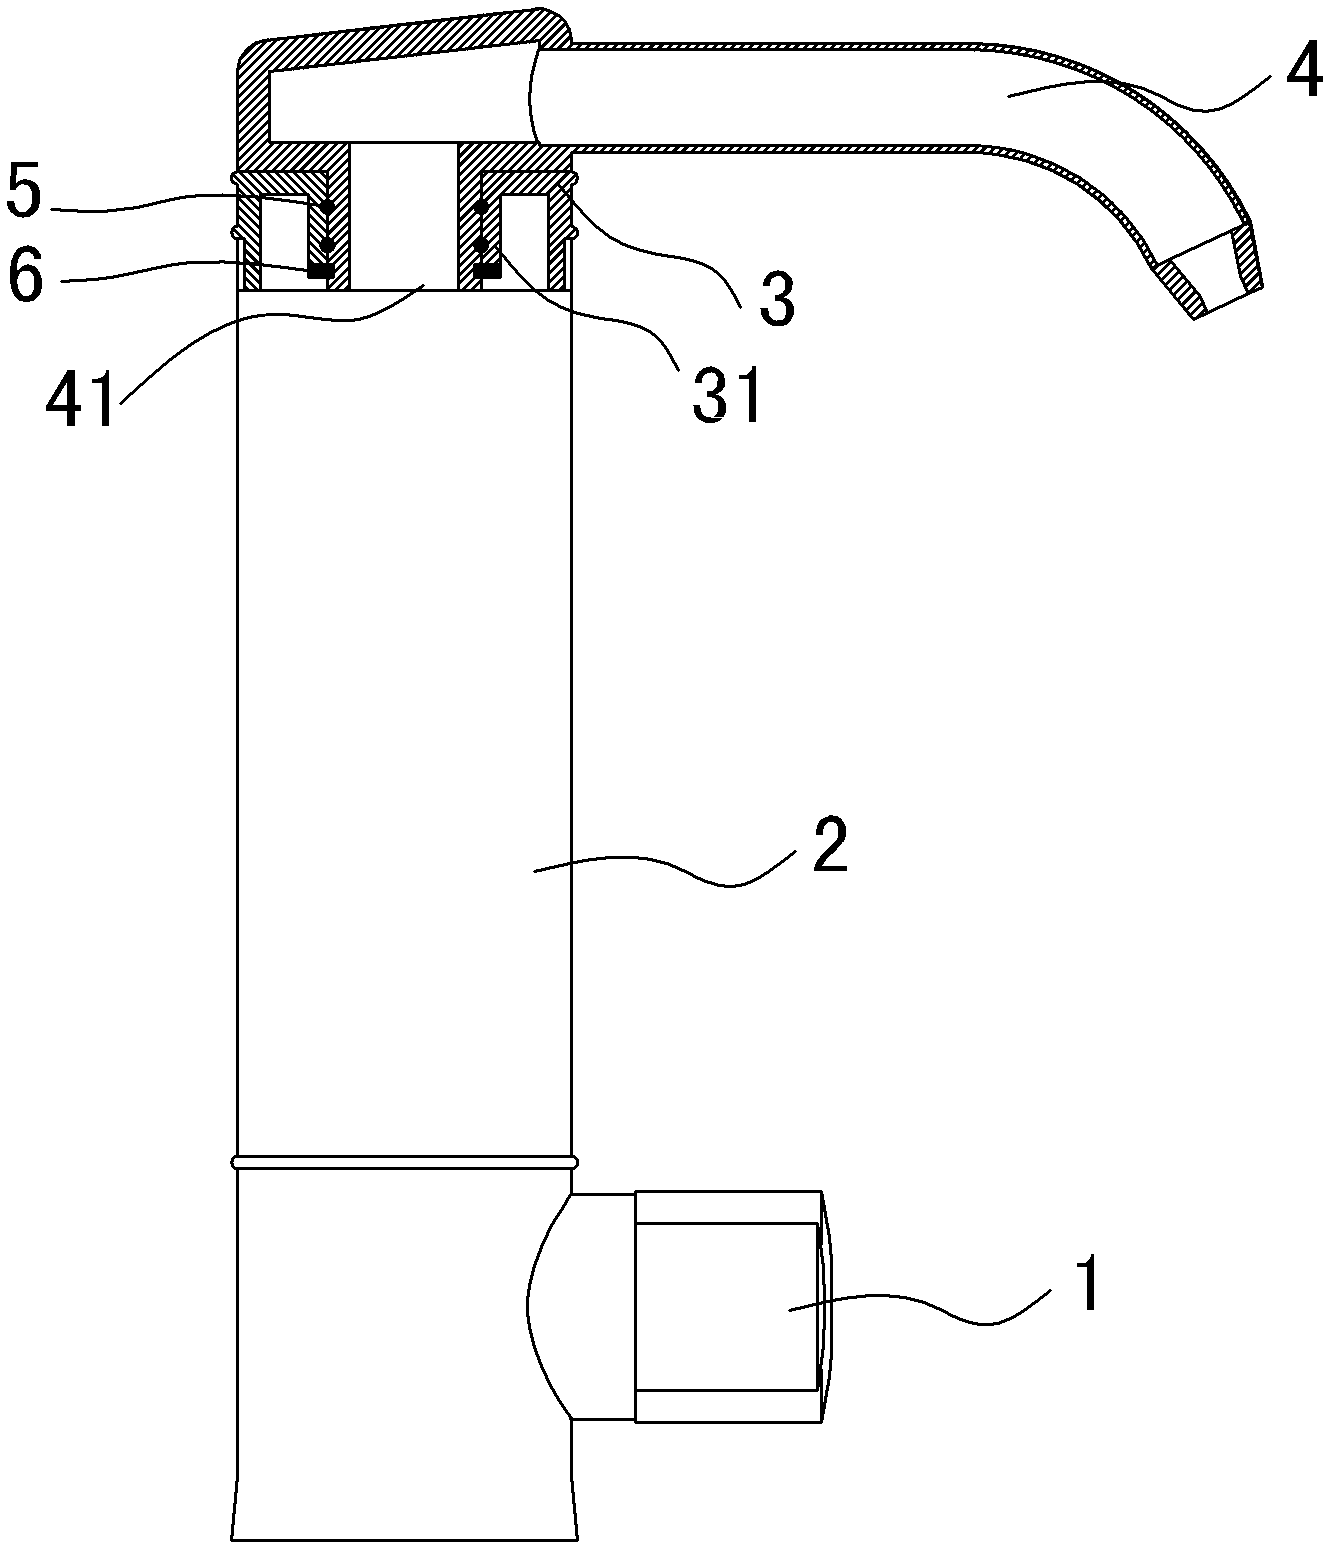 Rotary regulating-and-controlling-type water purification tap